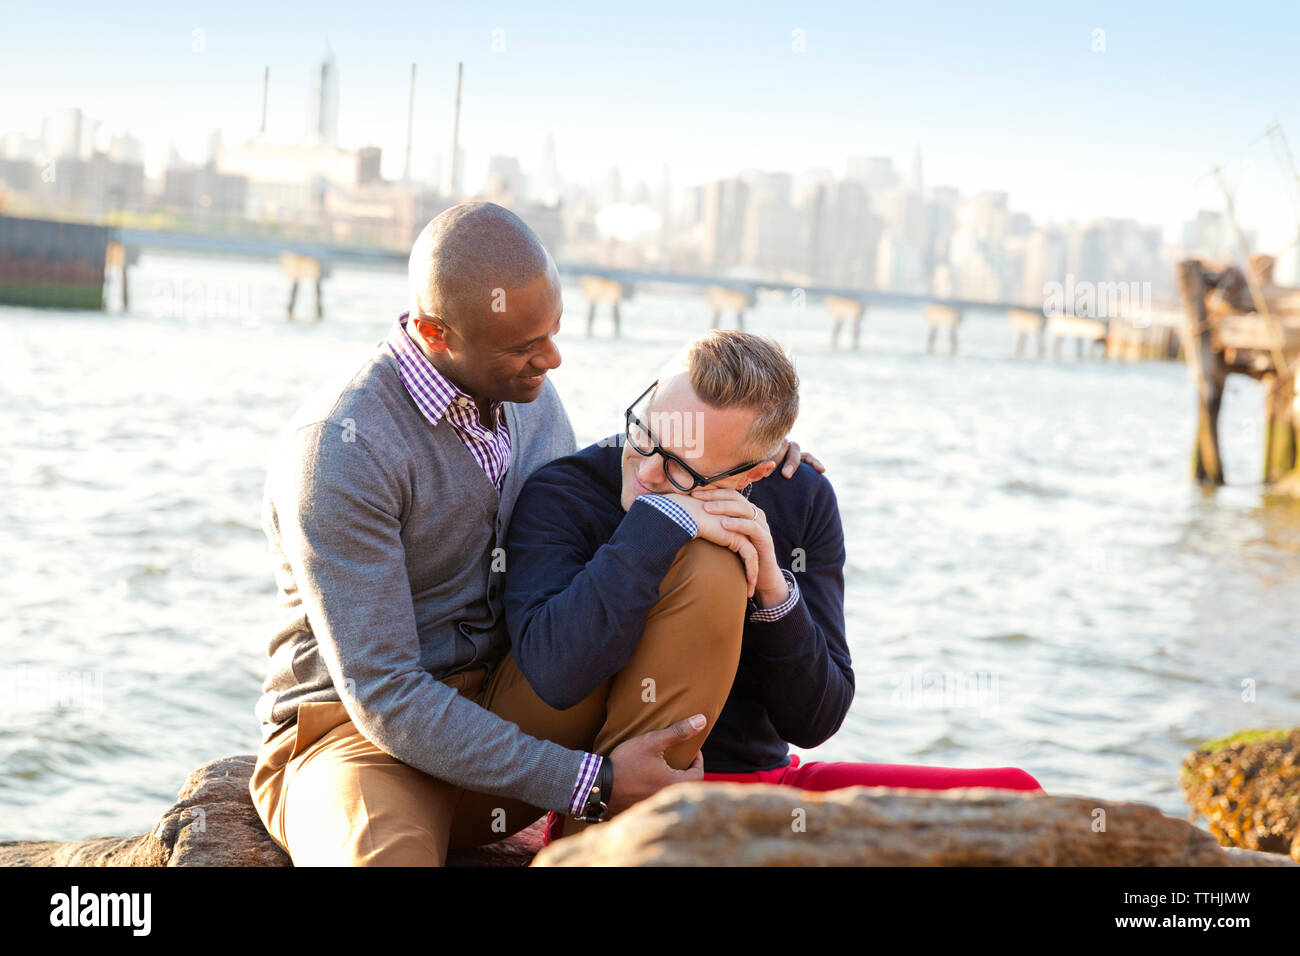 Romantic boyfriends while sitting on rocks against river Stock Photo